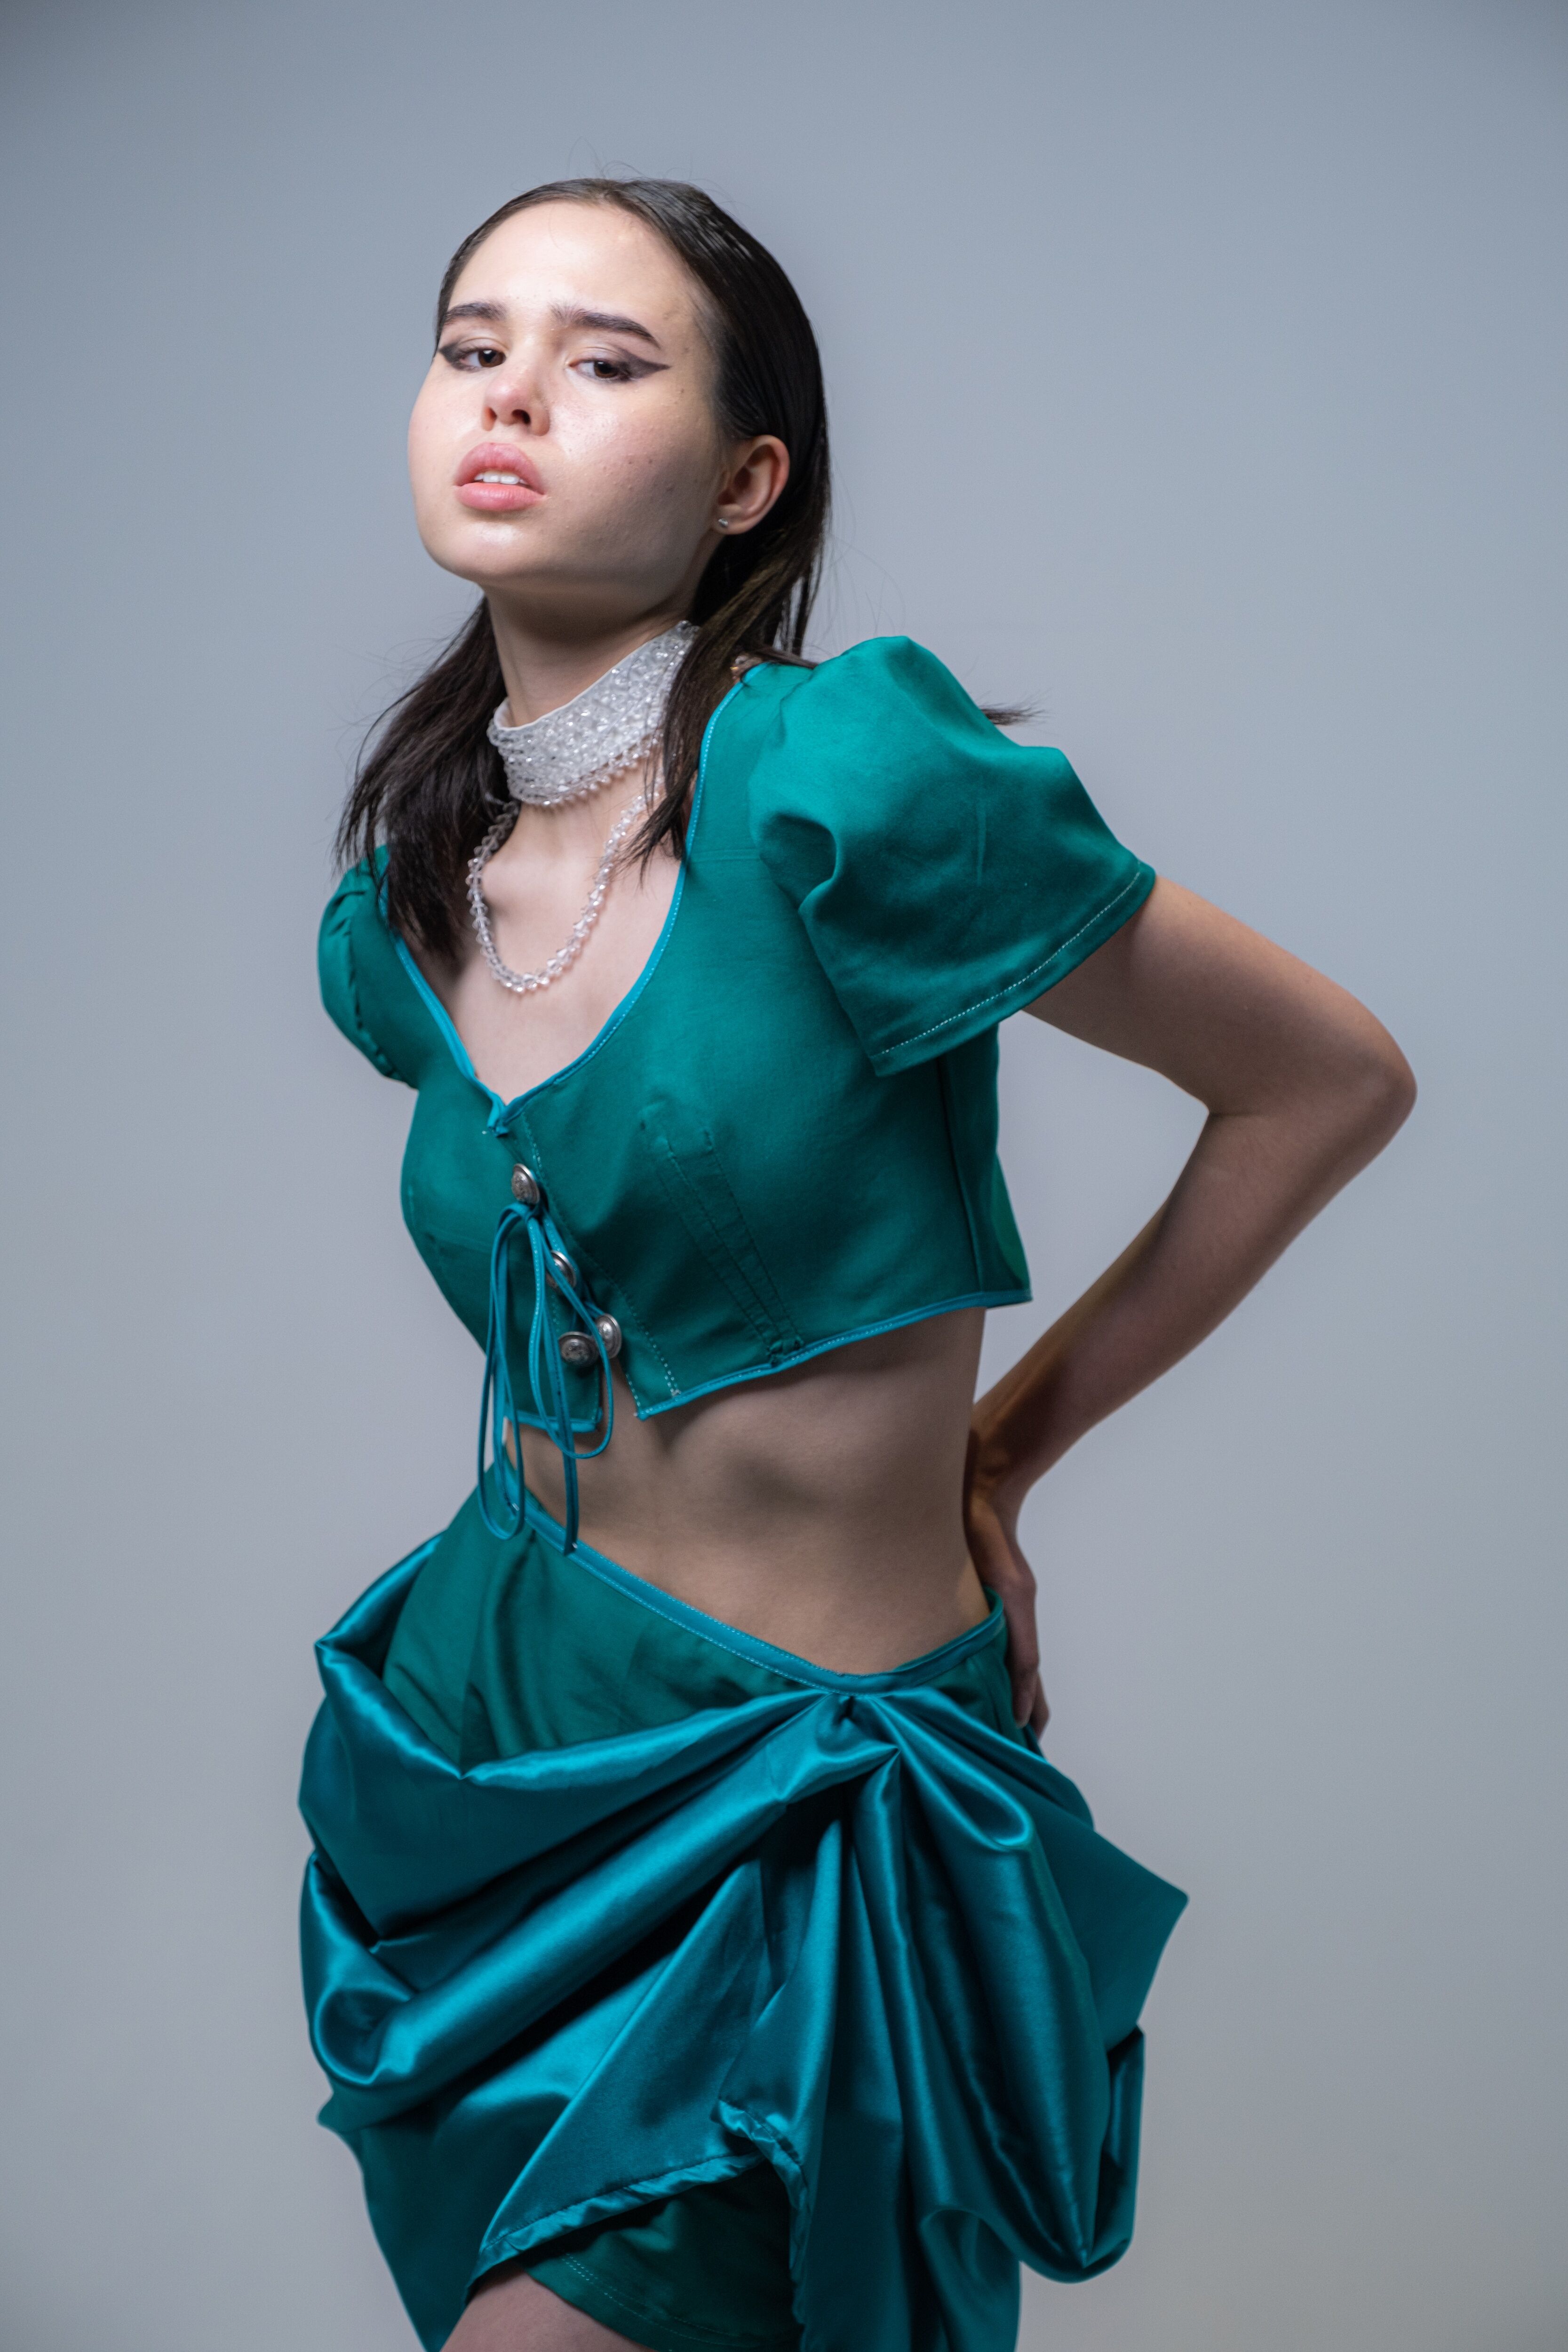  poised model showcasing a modern teal ensemble with a cropped top and draped skirt, accented by a pearl choker.